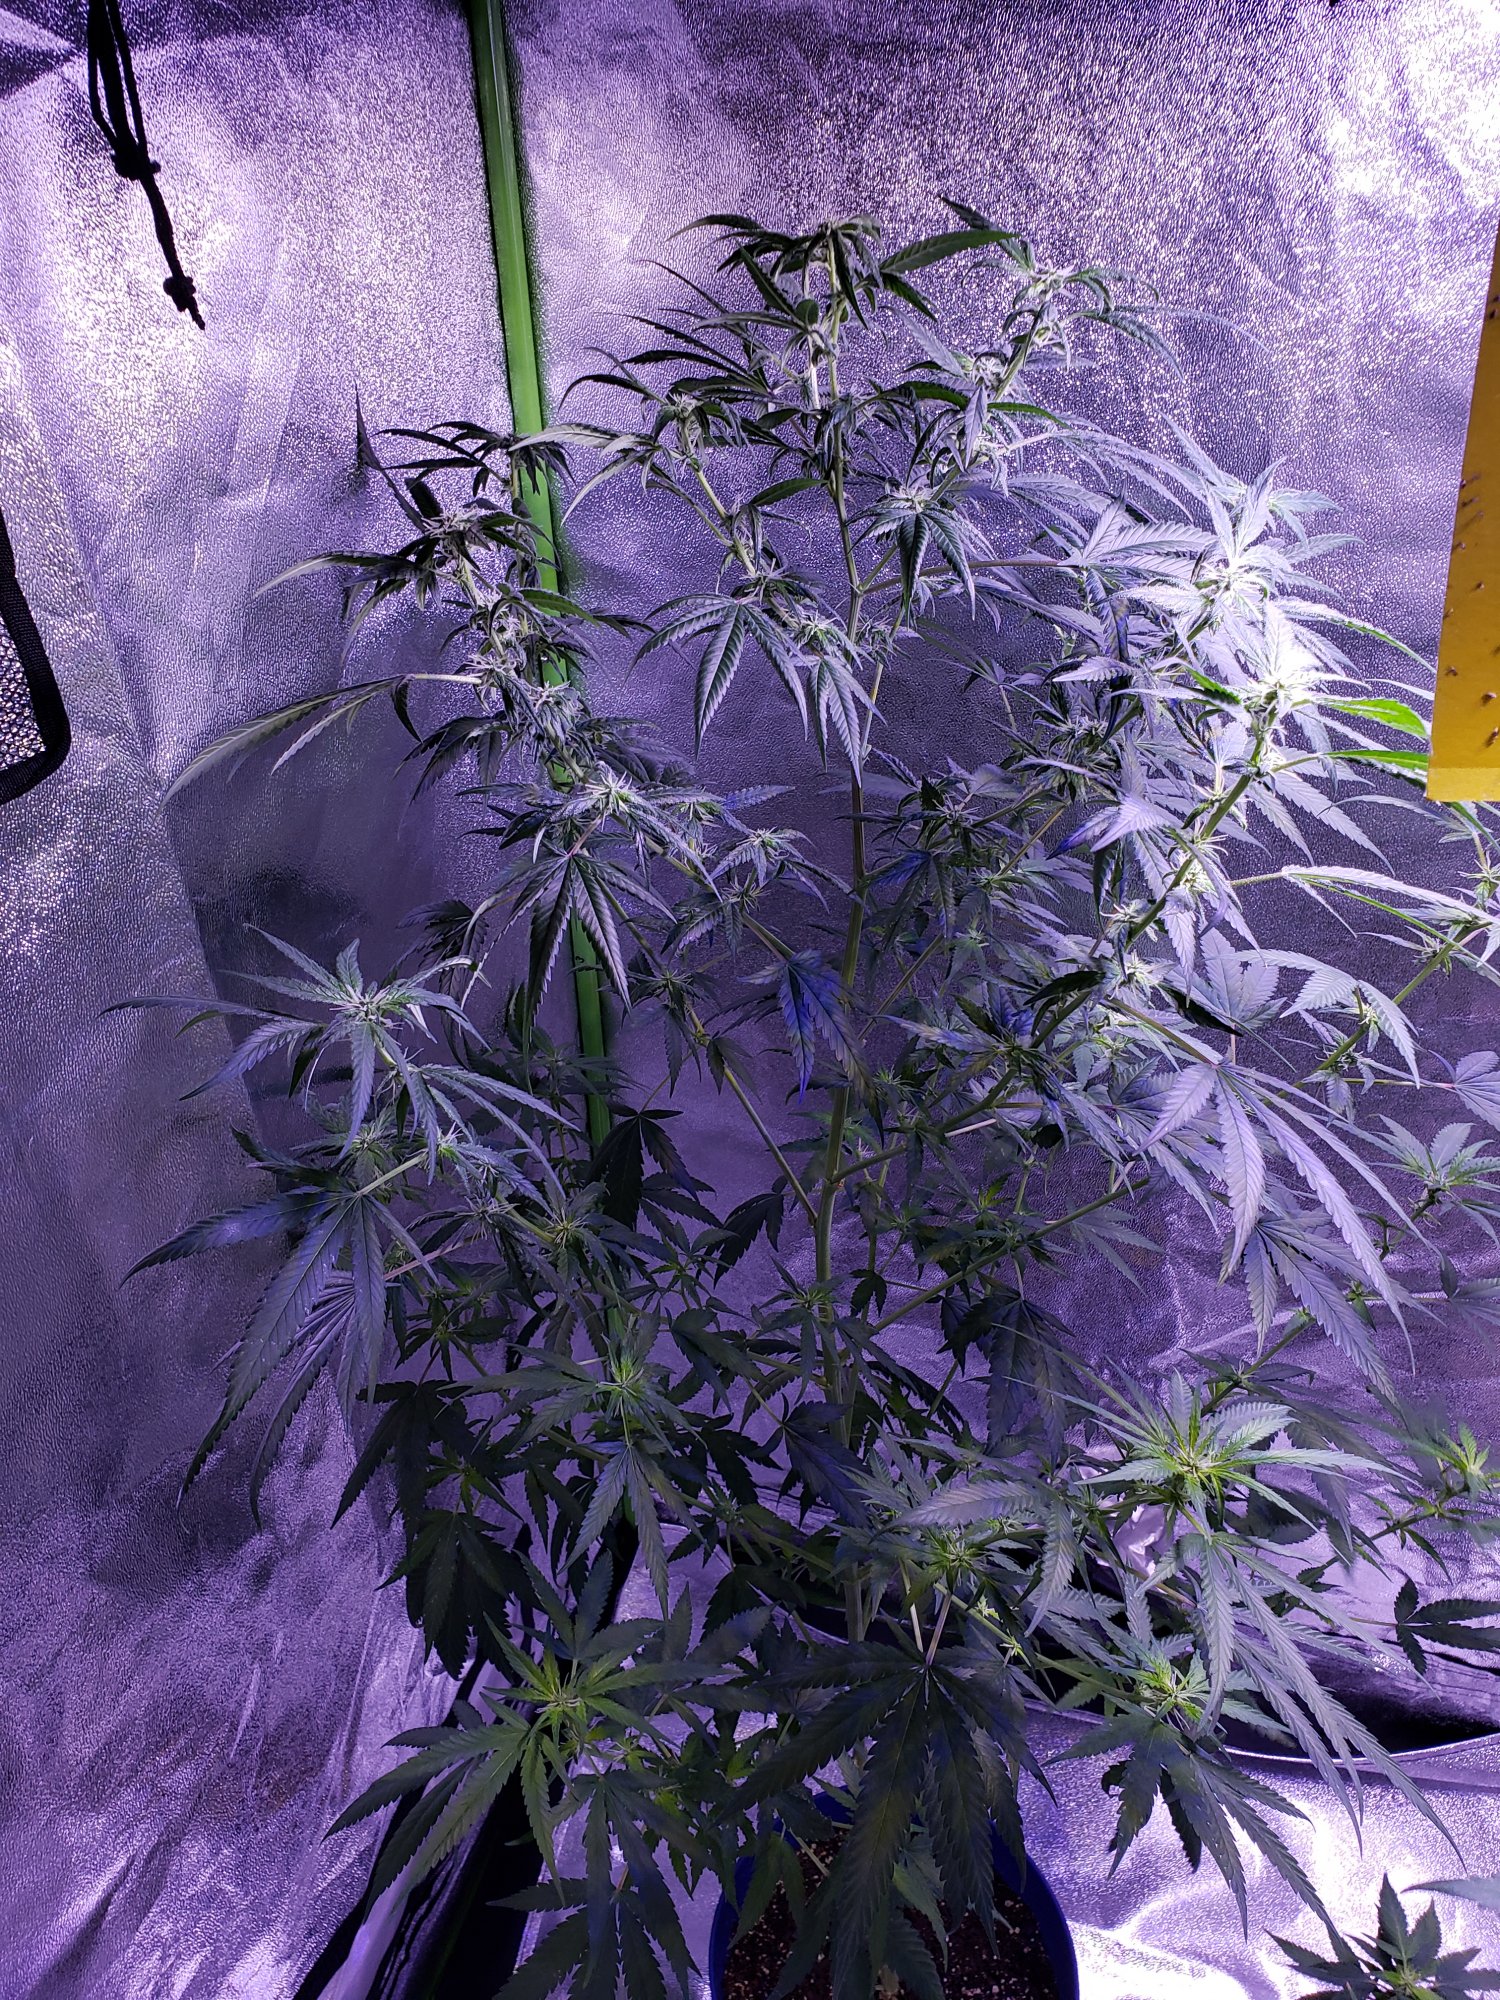 Super silver haze wilting clawing under any guesses about problem